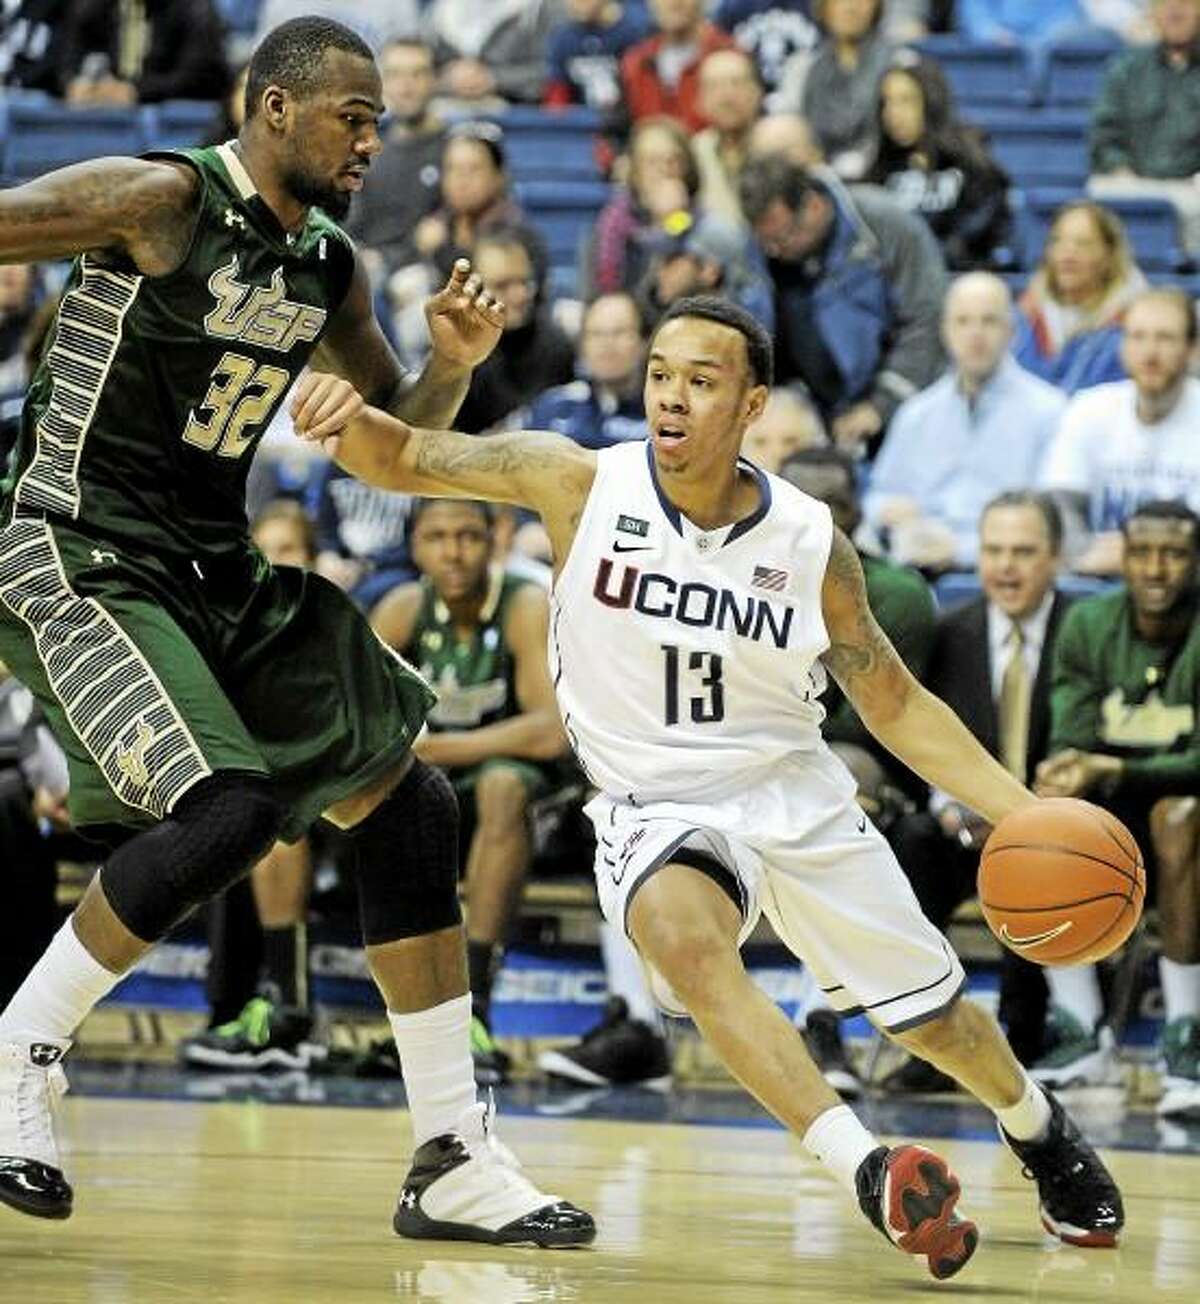 Connecticut's Shabazz Napier, right, drives past South Florida's Toarlyn Fitzpatrick during the first half of an NCAA college basketball game in Storrs, Conn., Sunday, Feb. 3, 2013. (AP Photo/Fred Beckham)